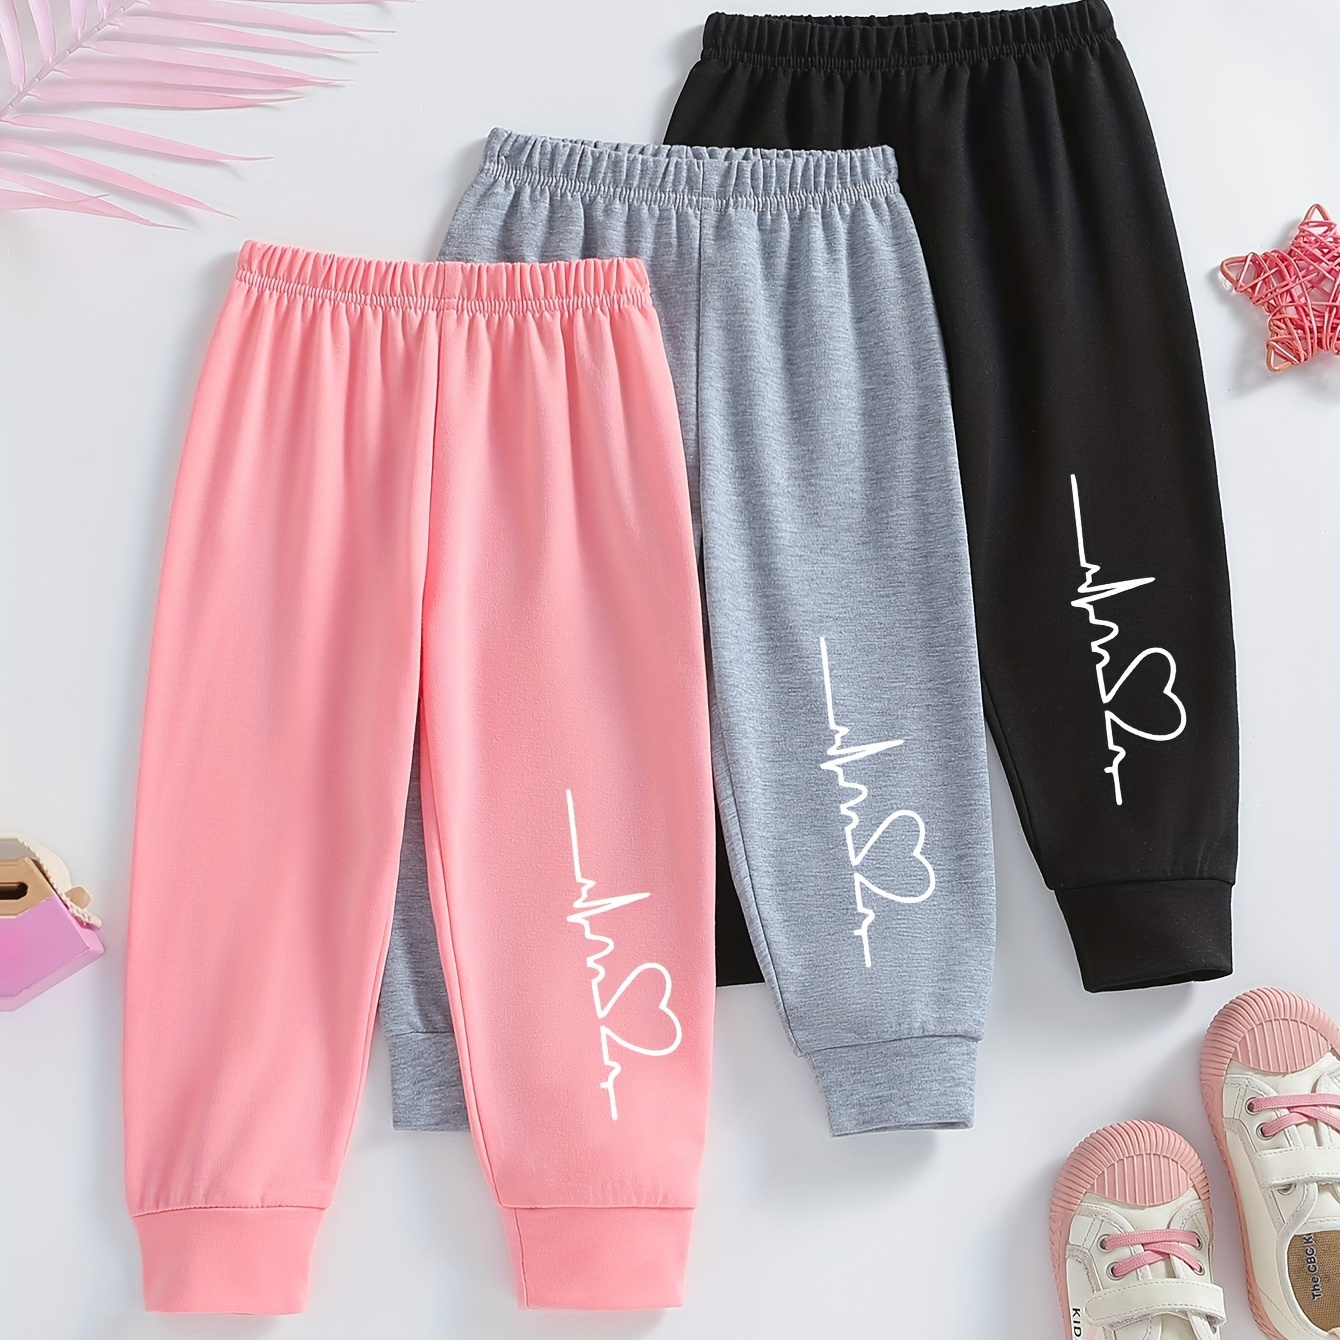 

3 Pcs, Heart Line Print And Other Pattern, Girls Elastic Waist Sweatpants, Casual Comfy Jogger Pants For All The Season